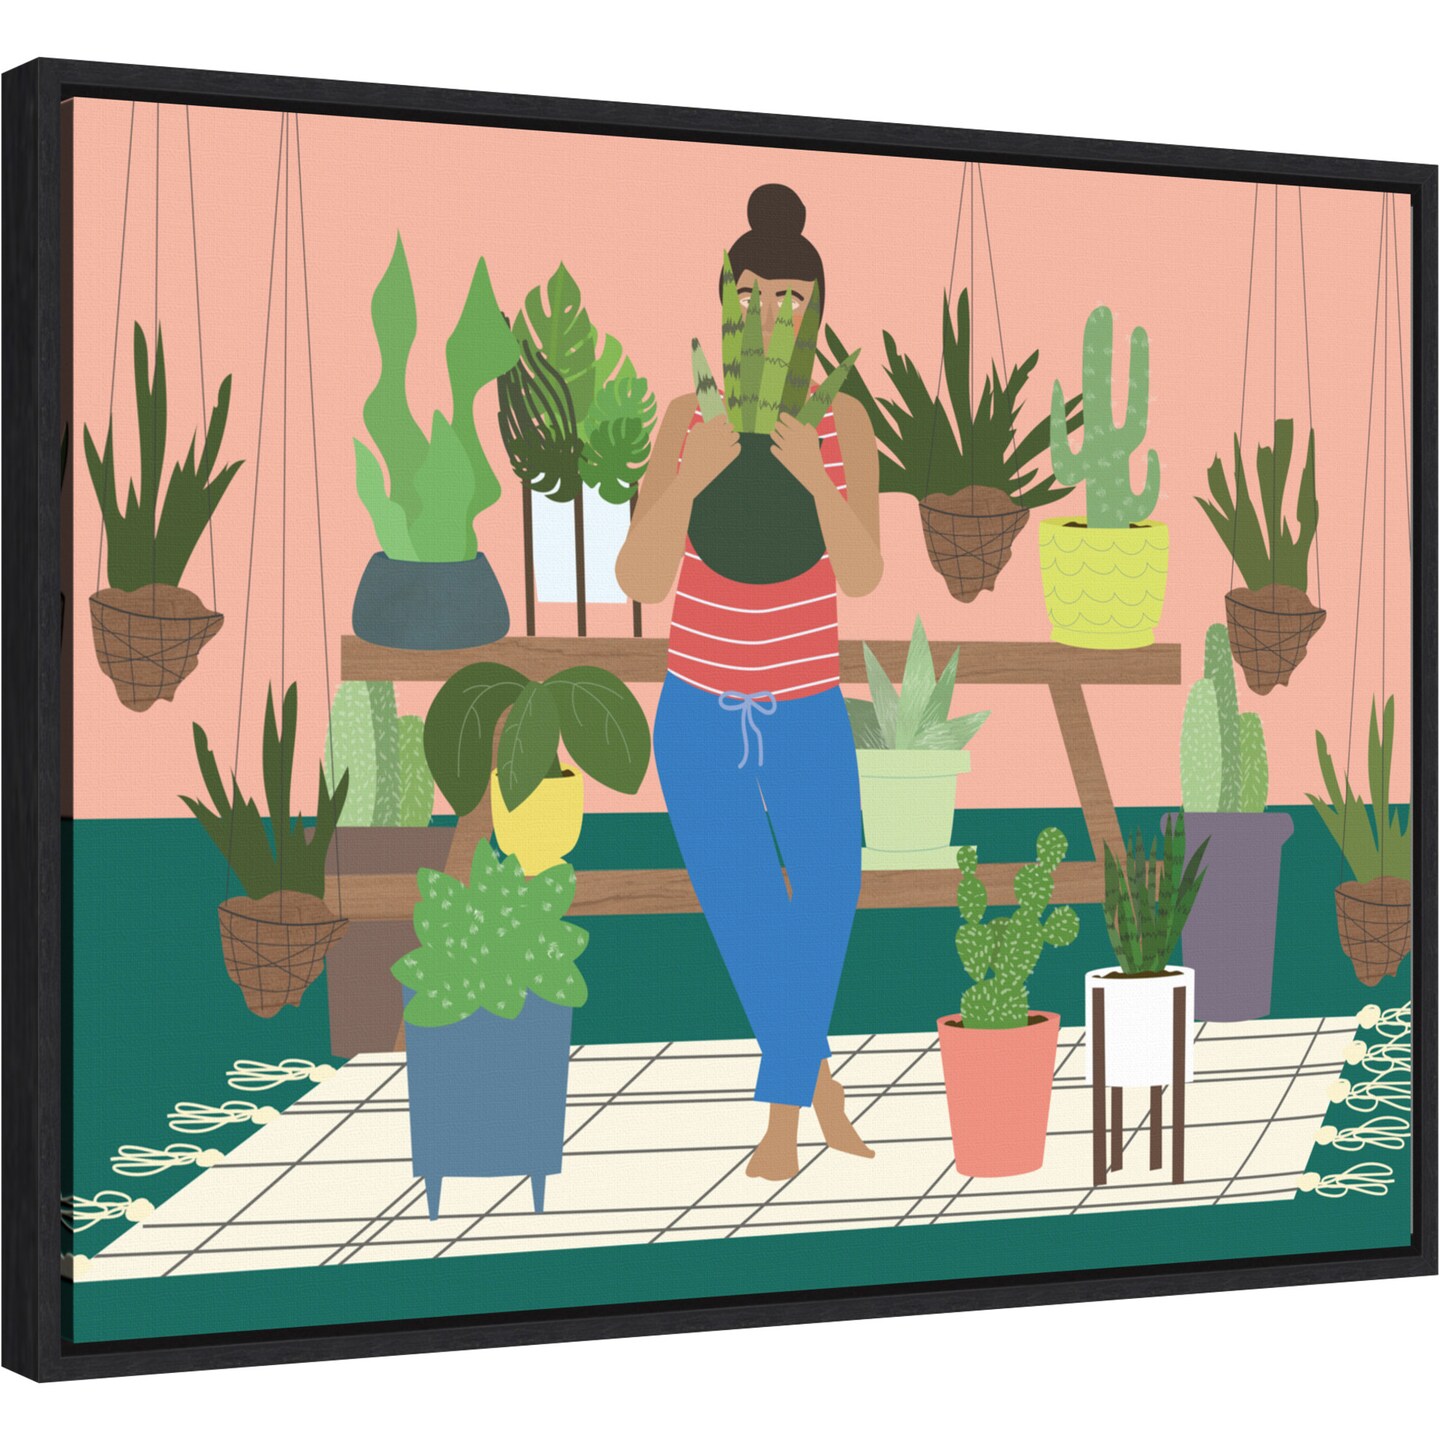 Plant Lady by Queenbe Monyei 24-in. W x 18-in. H. Canvas Wall Art Print Framed in Black